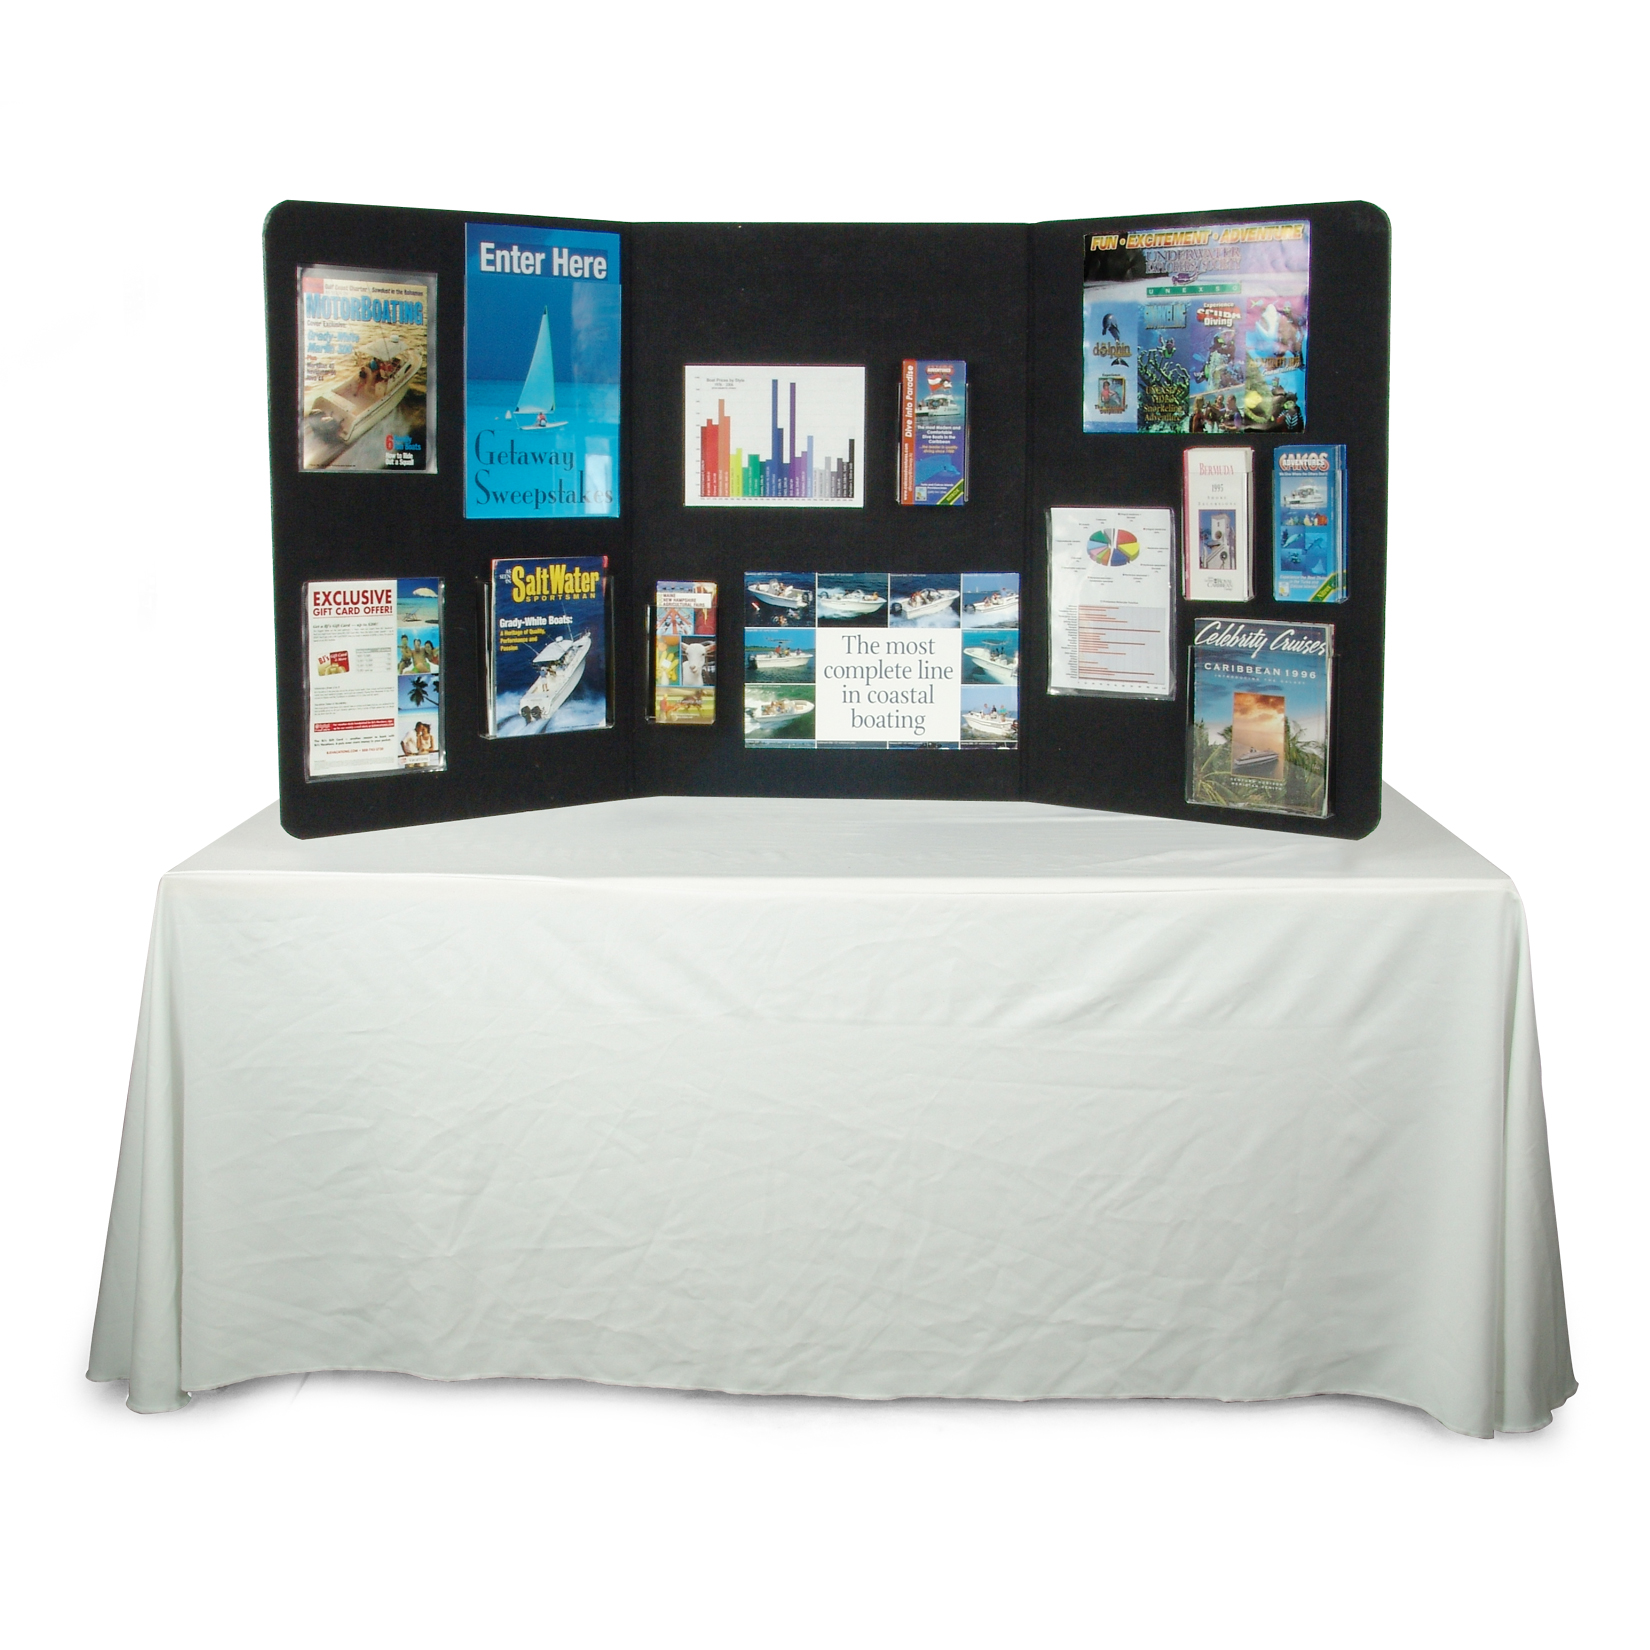 Hook-and-Loop Folding Board Only with Header – DoTradeshow